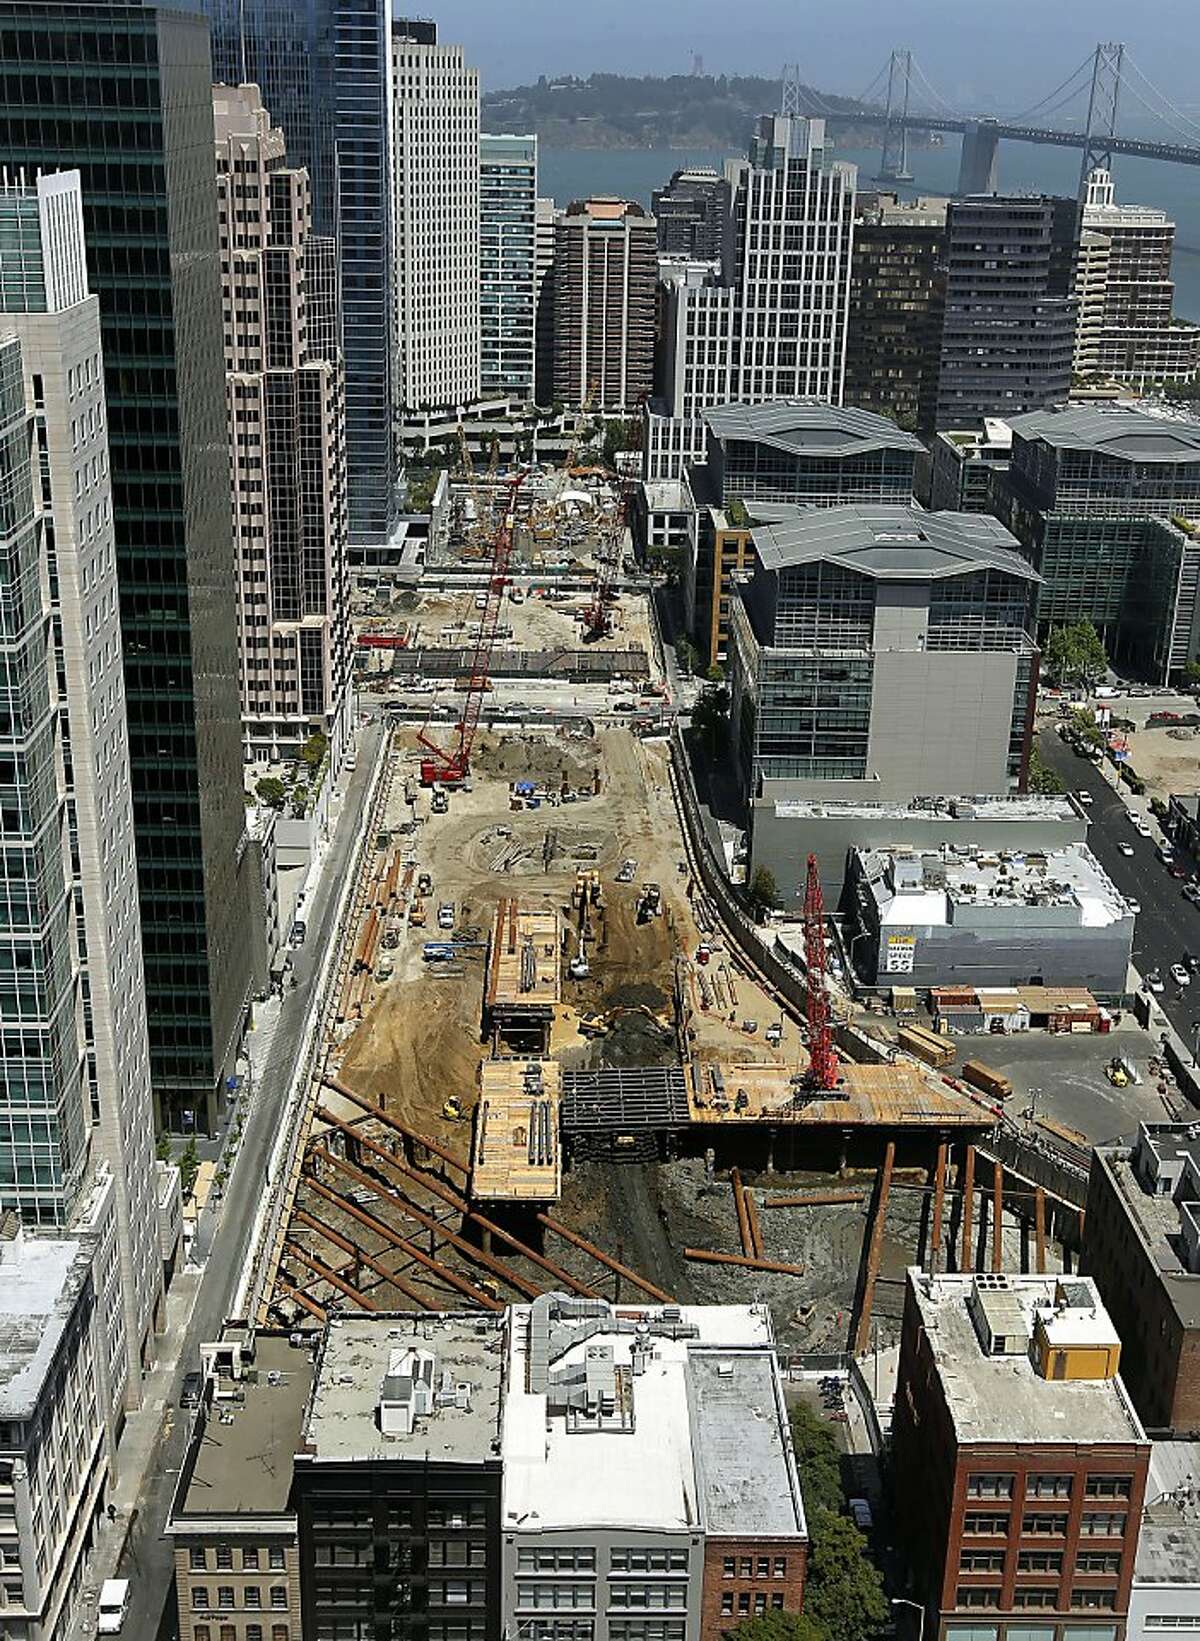 Nearly three blocks of construction continues on the Transbay Transit Center South of Market St. in San Francisco, Ca., on Thursday May 17, 2012.